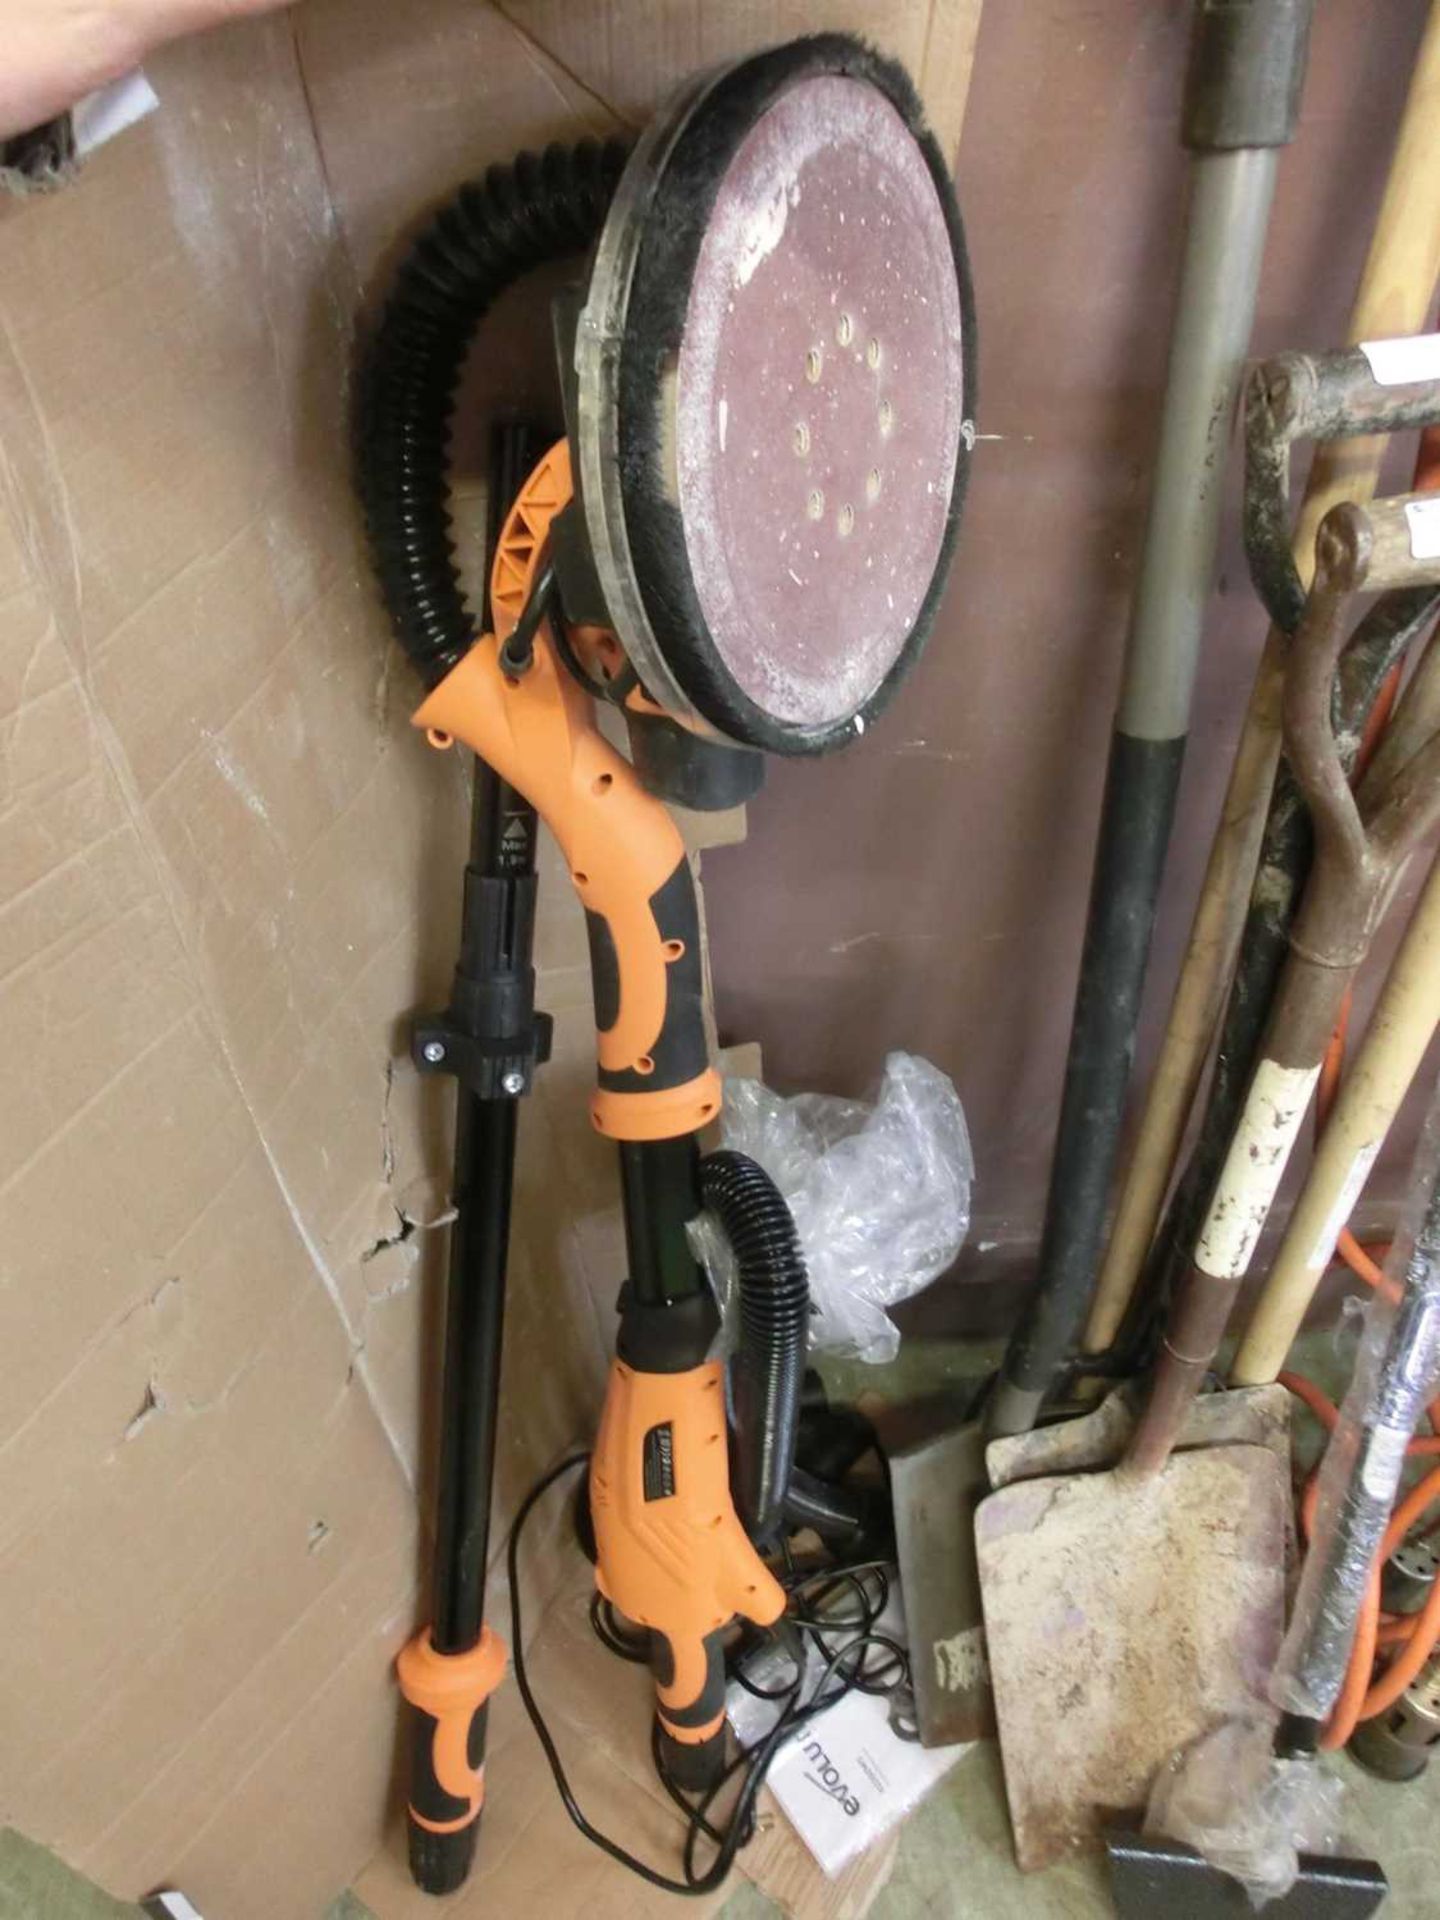 An Evolution electric wall and ceiling sander